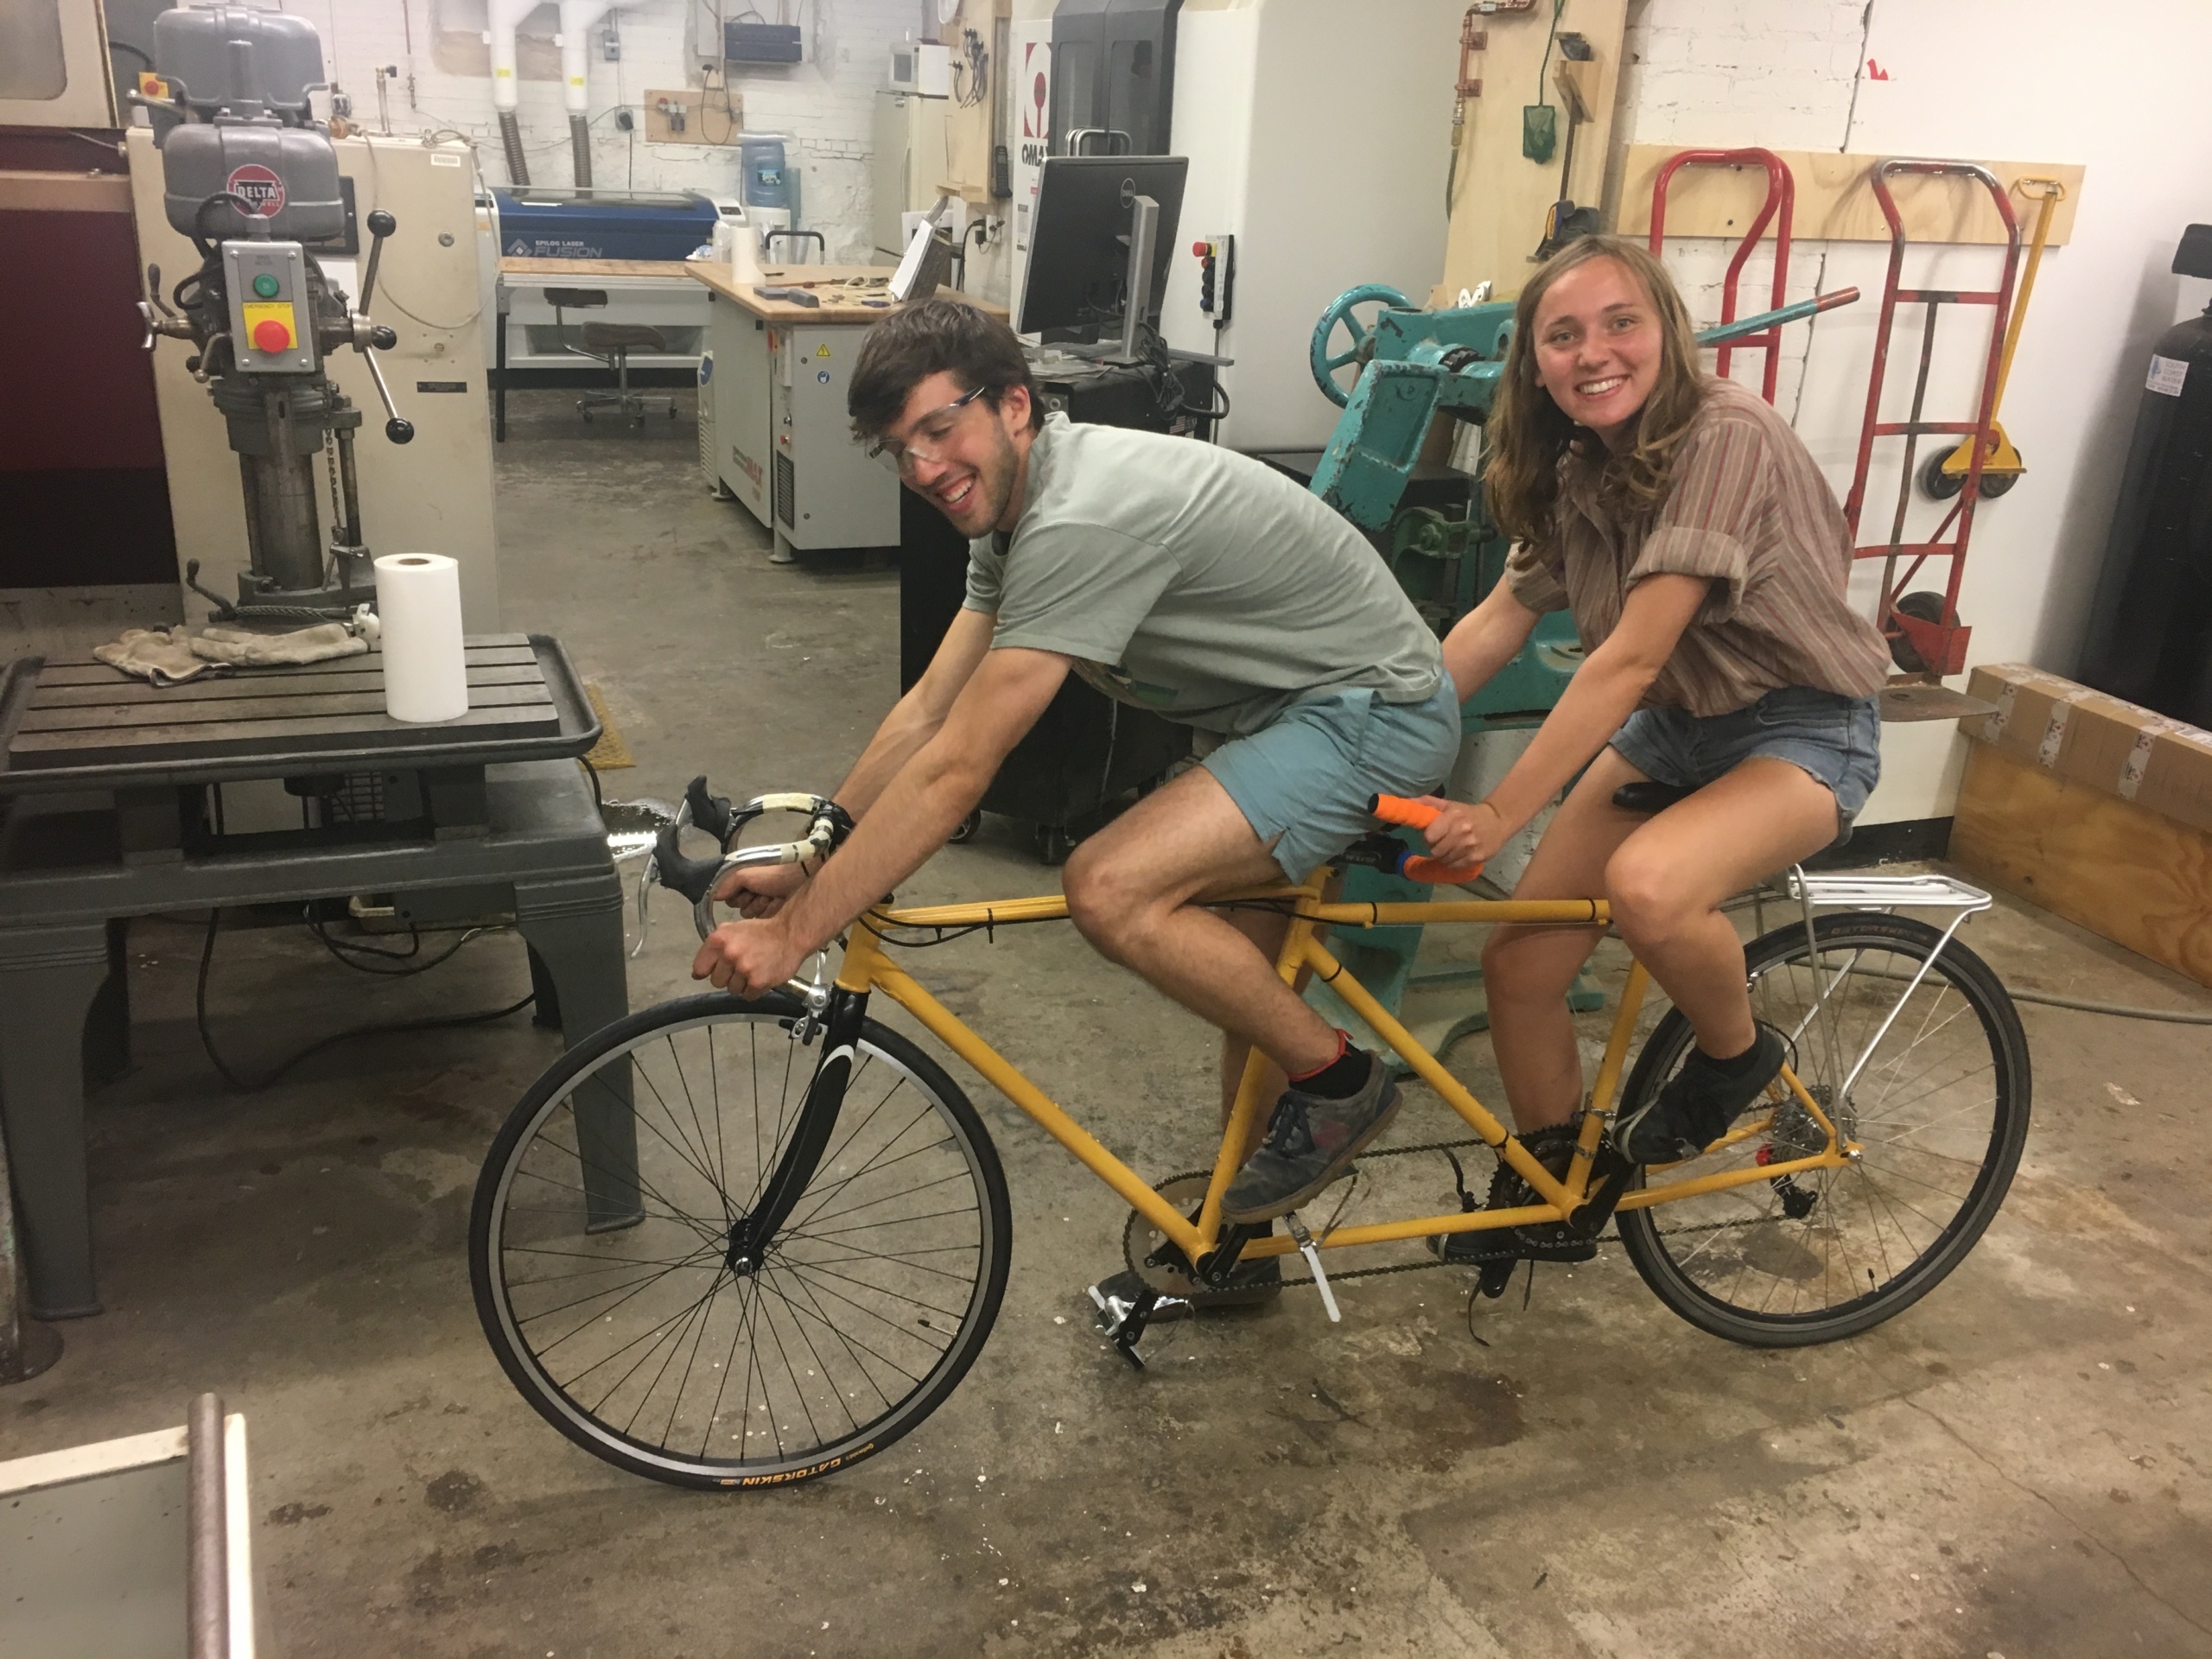 One of the beautiful things about the Hobby Shop is that it is a space open to all students, faculty, staff and alums to make whatever they want. Abe and Clem built this tandem bike from two old frames and some scrap metal. They left the day after graduation and rode it across the country from Massachusetts to Oregon.